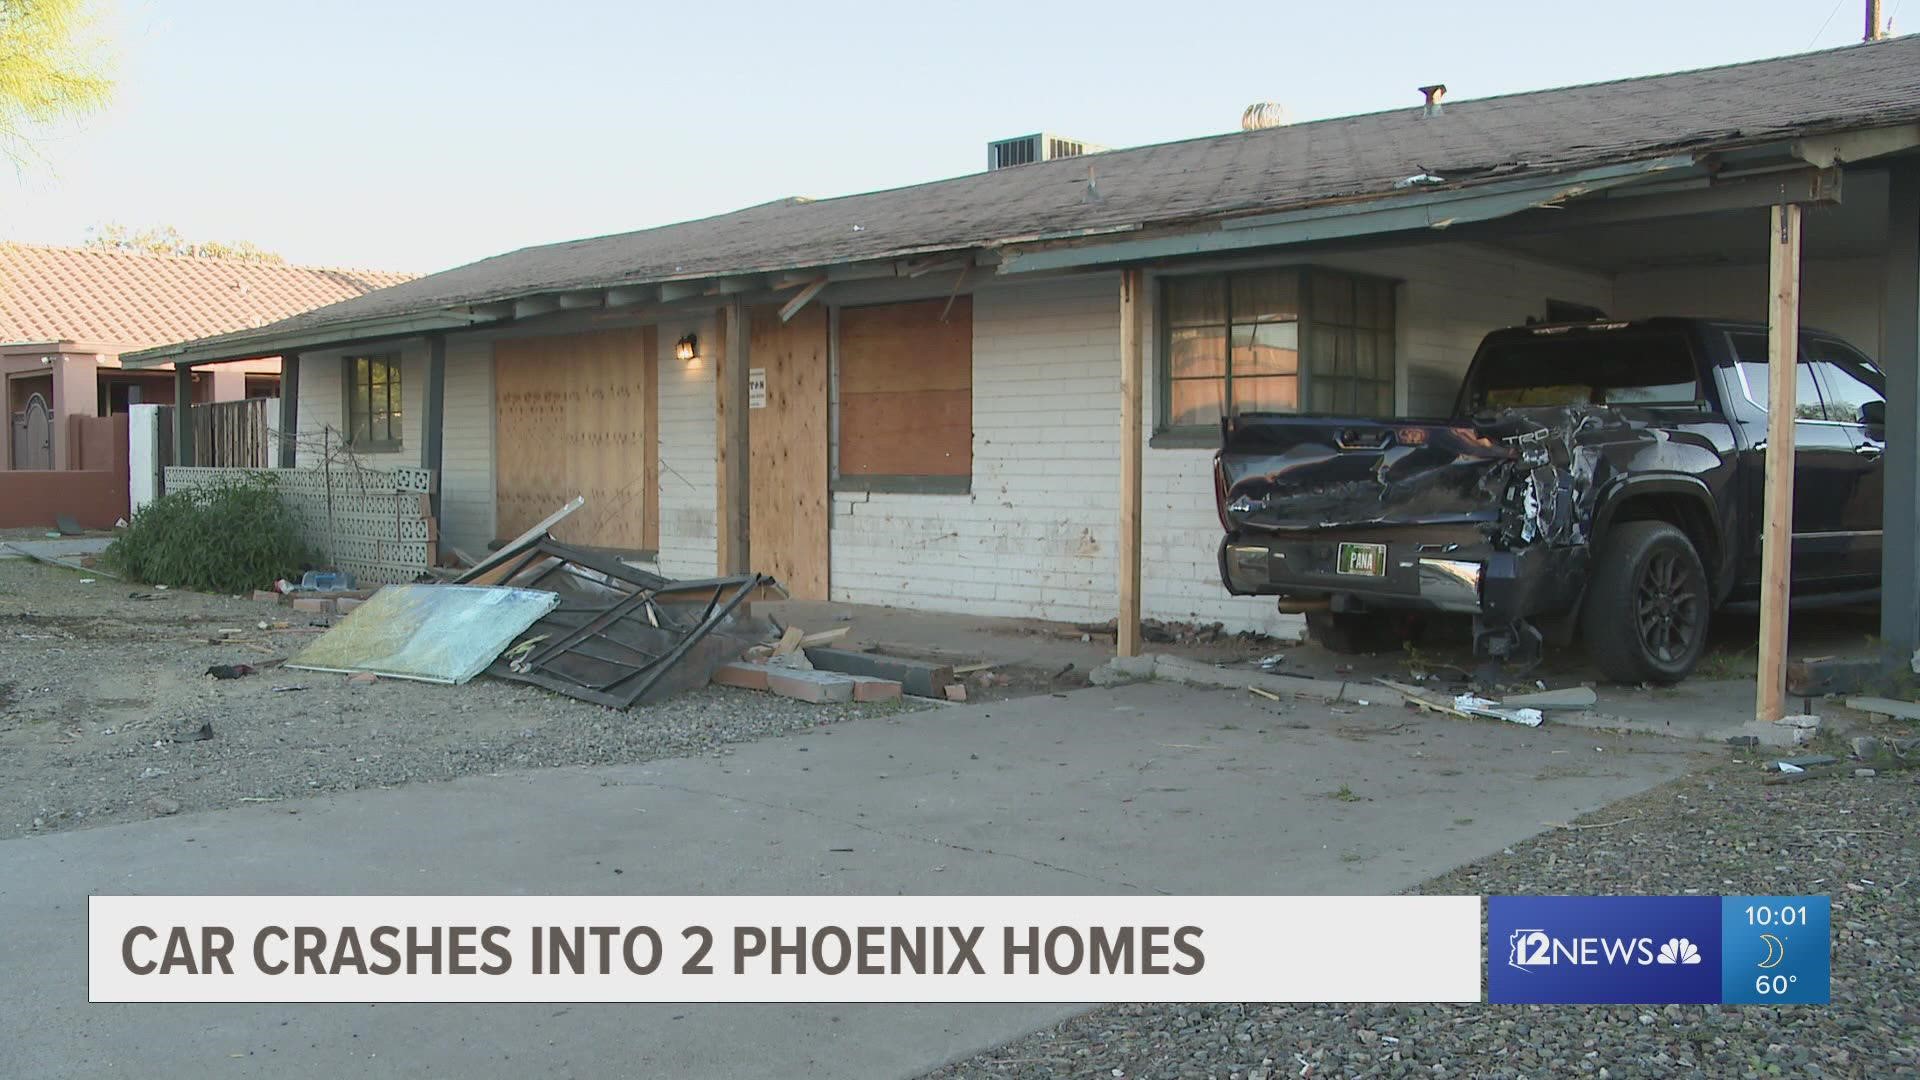 Early Thursday morning a driver crashed into two homes and caused severe damage before taking off on foot.